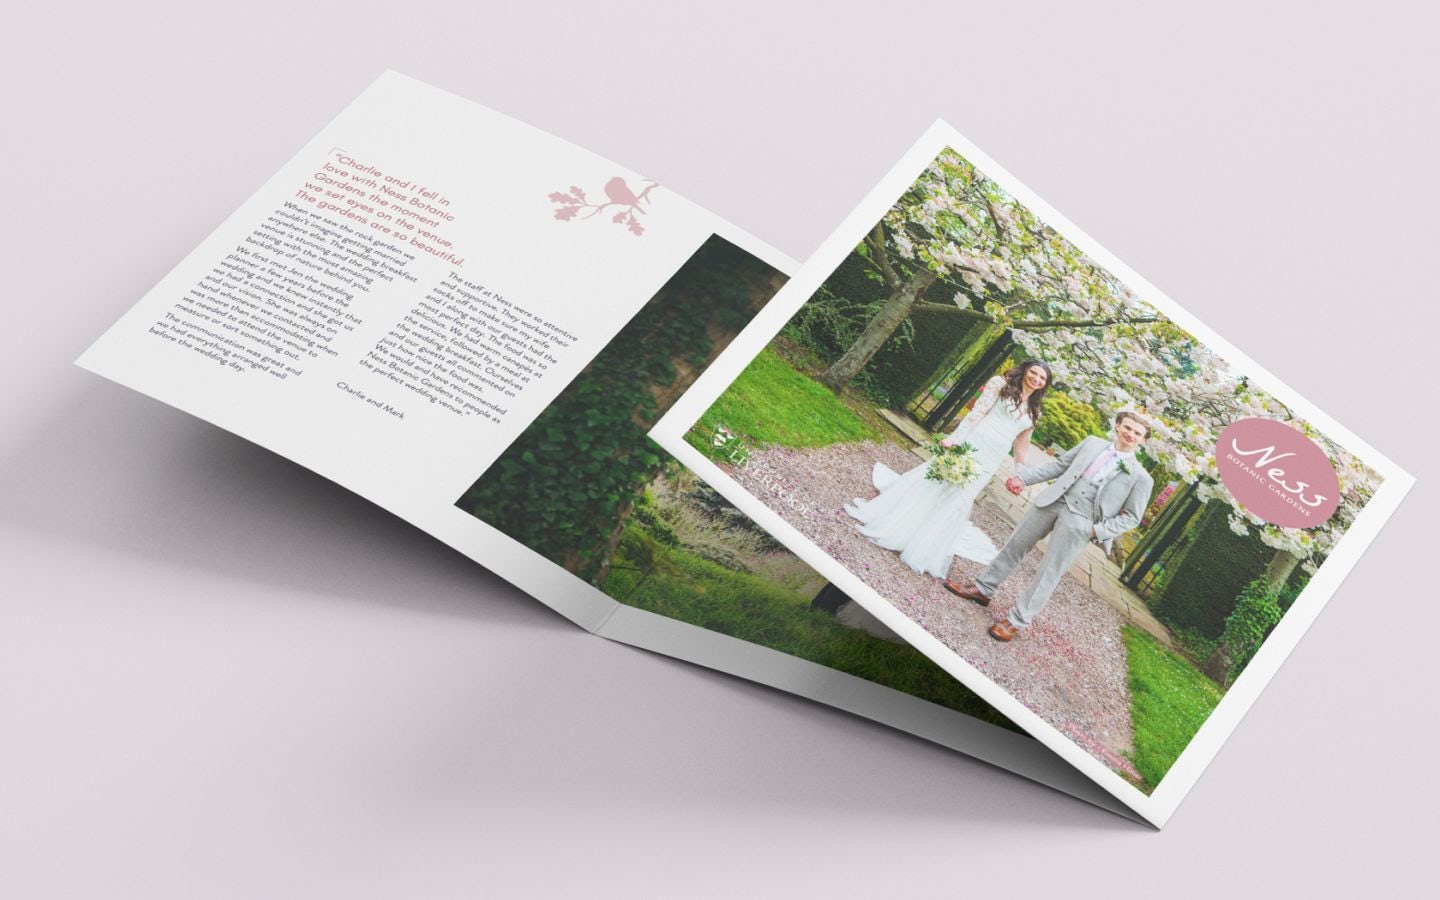 Mockup of an open square trifold wedding brochure featuring a personal story on the left and a photograph of a bride and groom under a floral arch on the right with a 'Ness' logo.